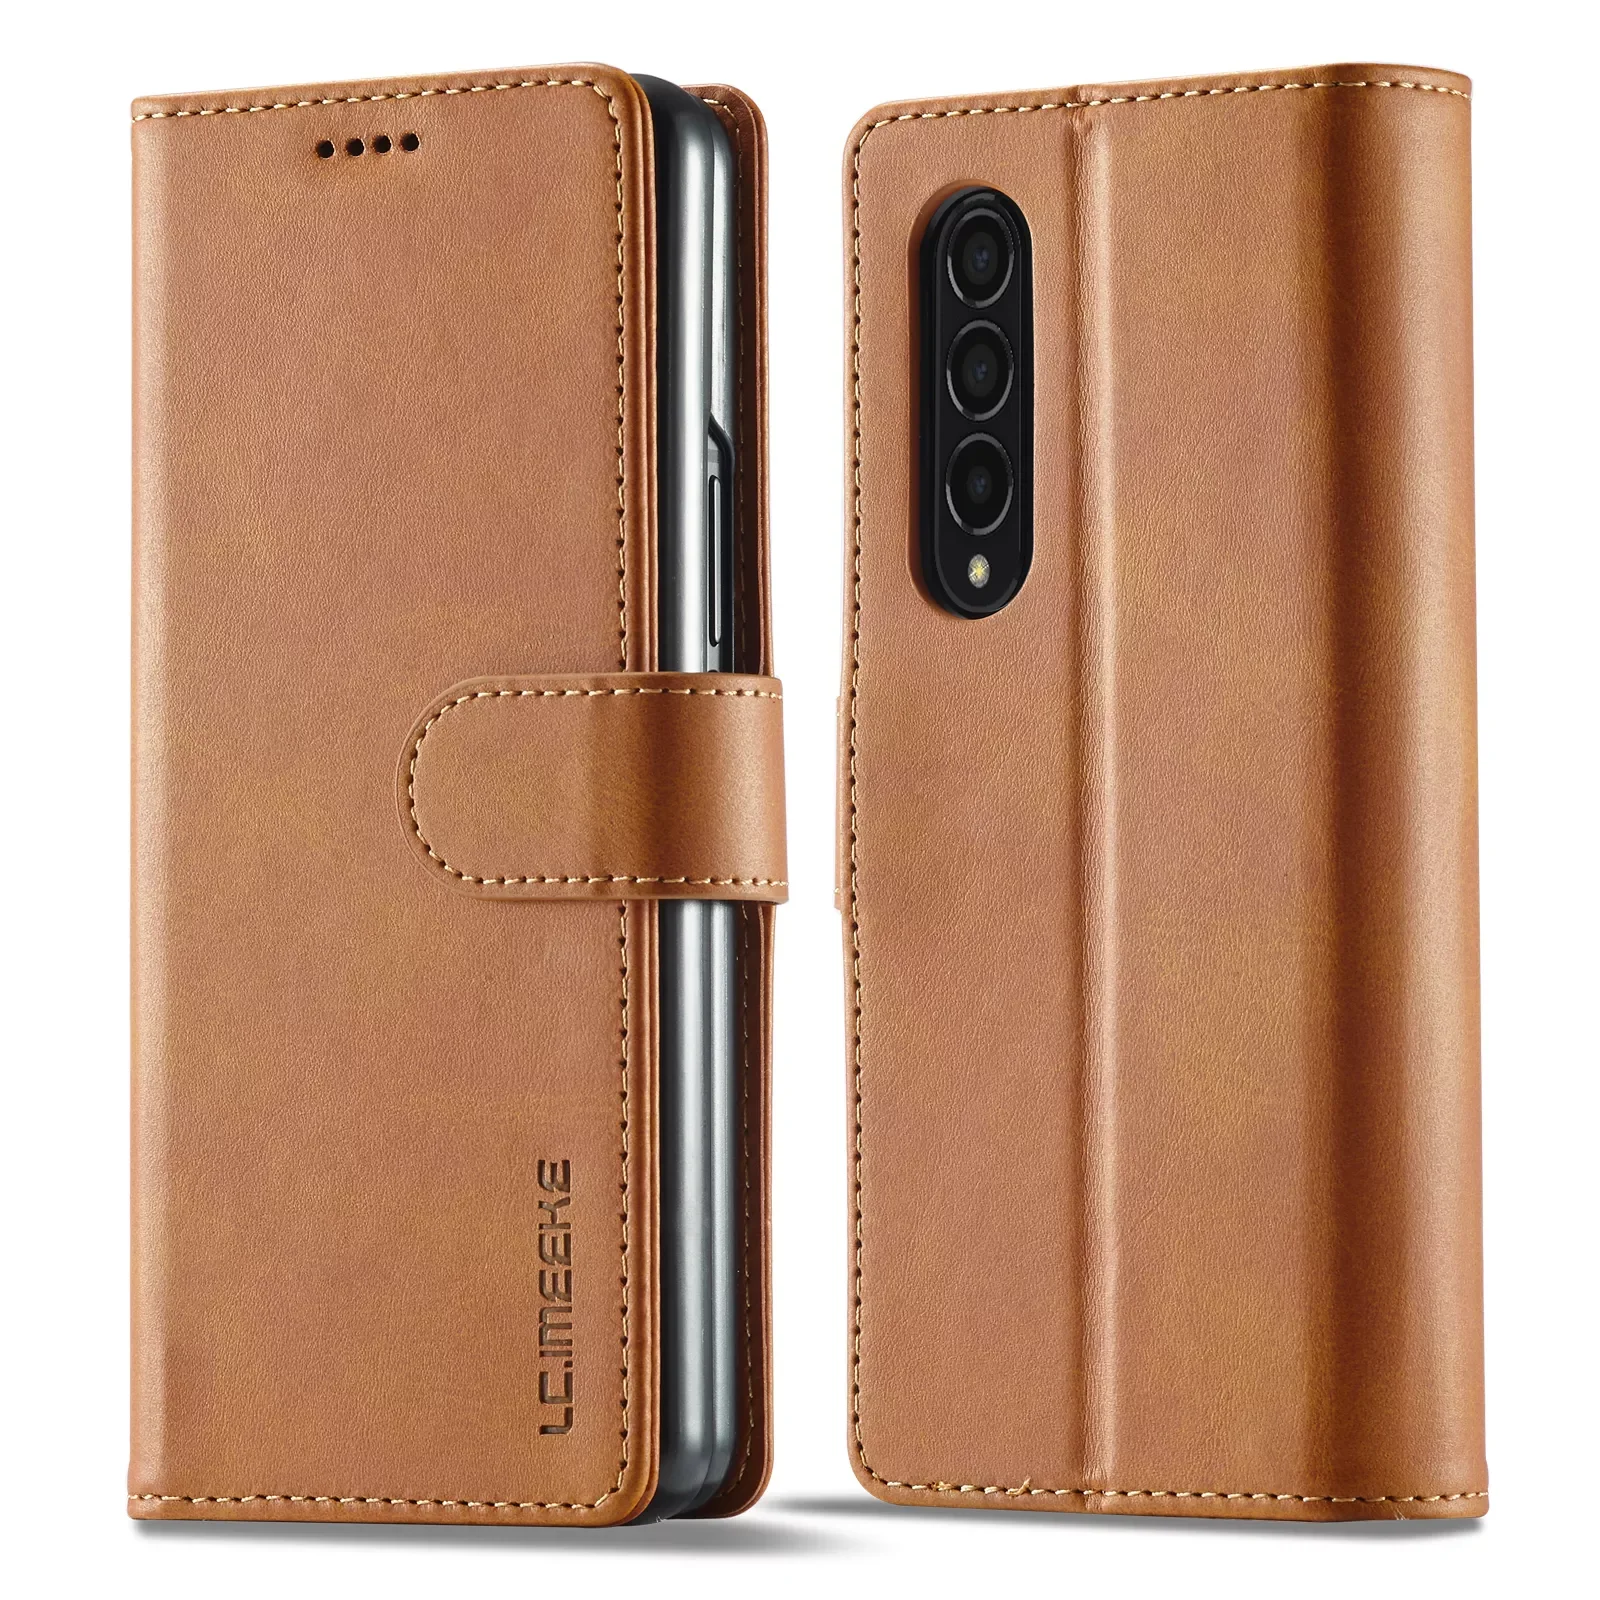 Galaxy Z Fold 3 Case With Card Pocket Folding Flip Cover Wallet Leather Book Case For Galaxy Z Fold 3 Fold3 Coque